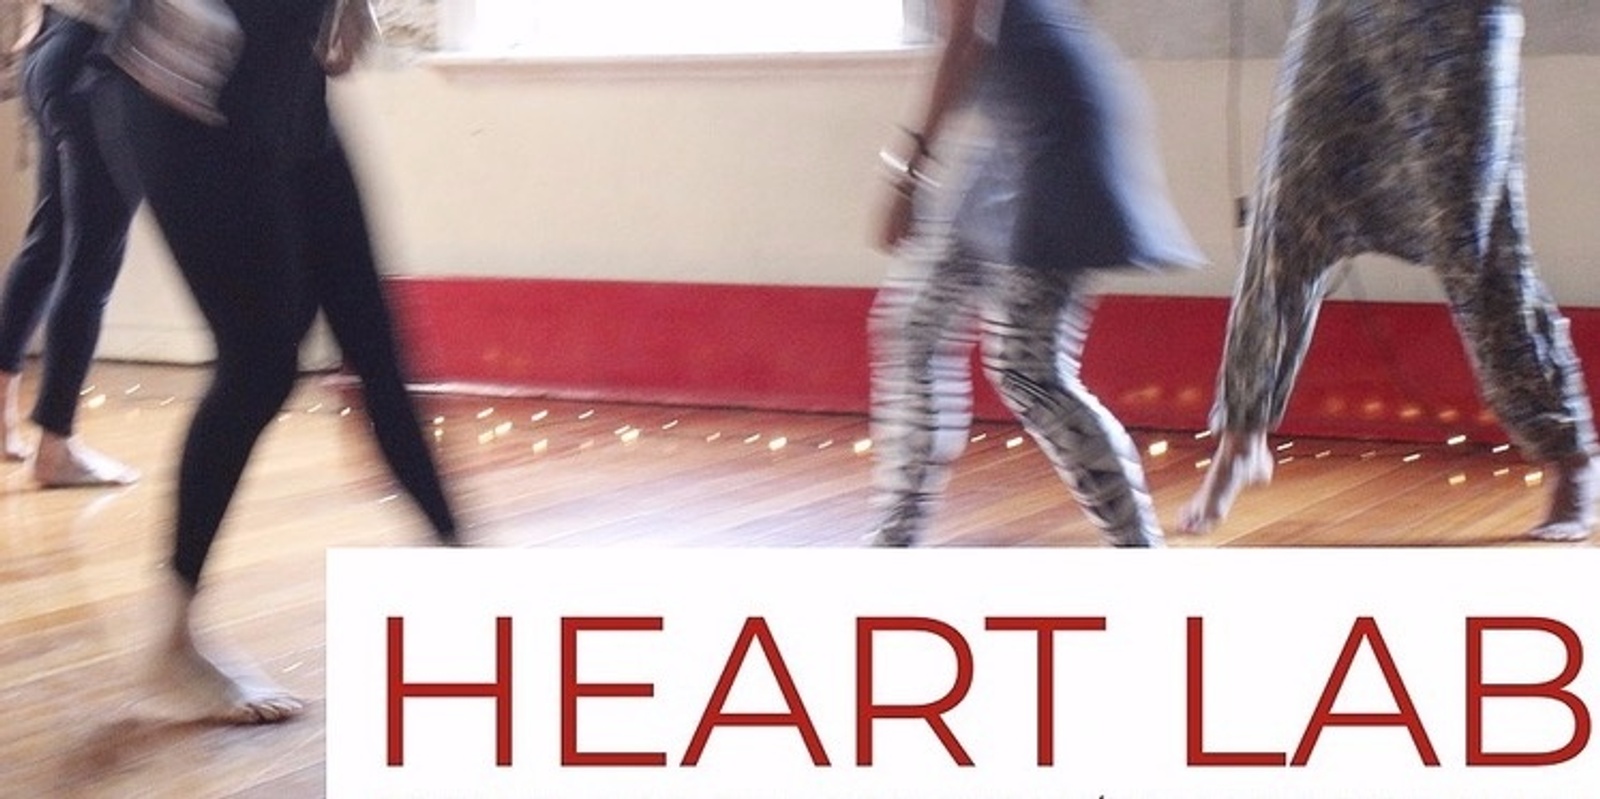 Banner image for HEART LAB - Open Floor movement weekly class